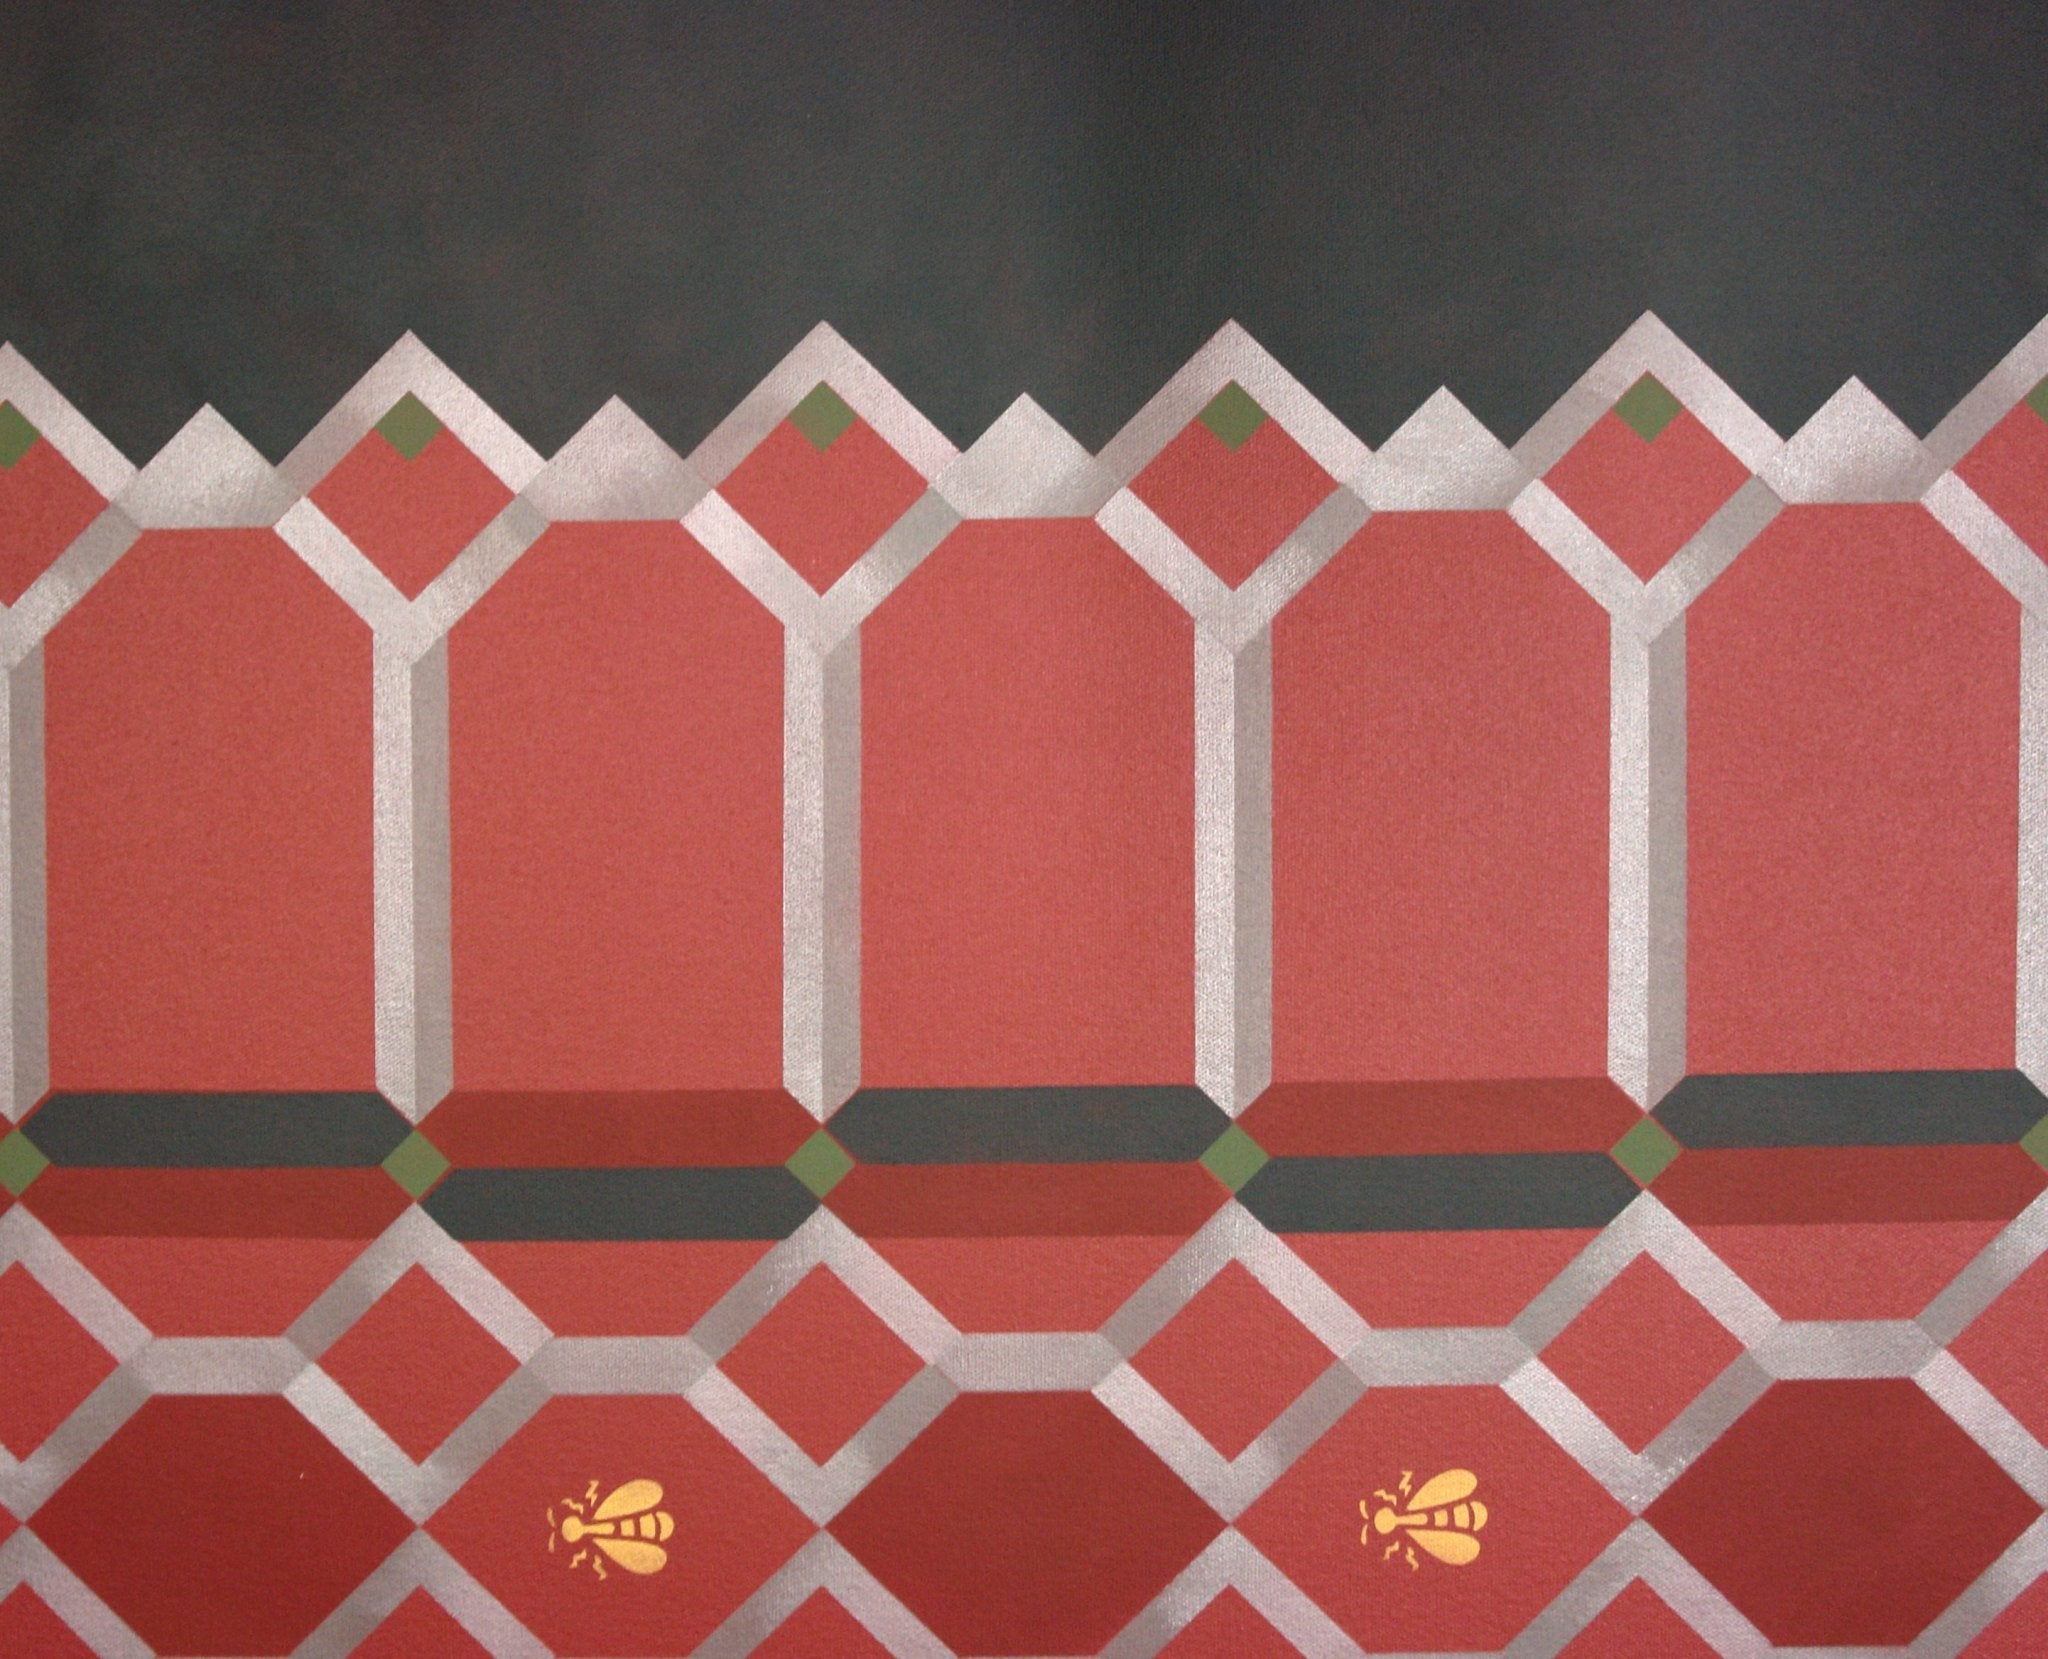 A close up image of Honeycomb Floorcloth #1 showing the border pattern.